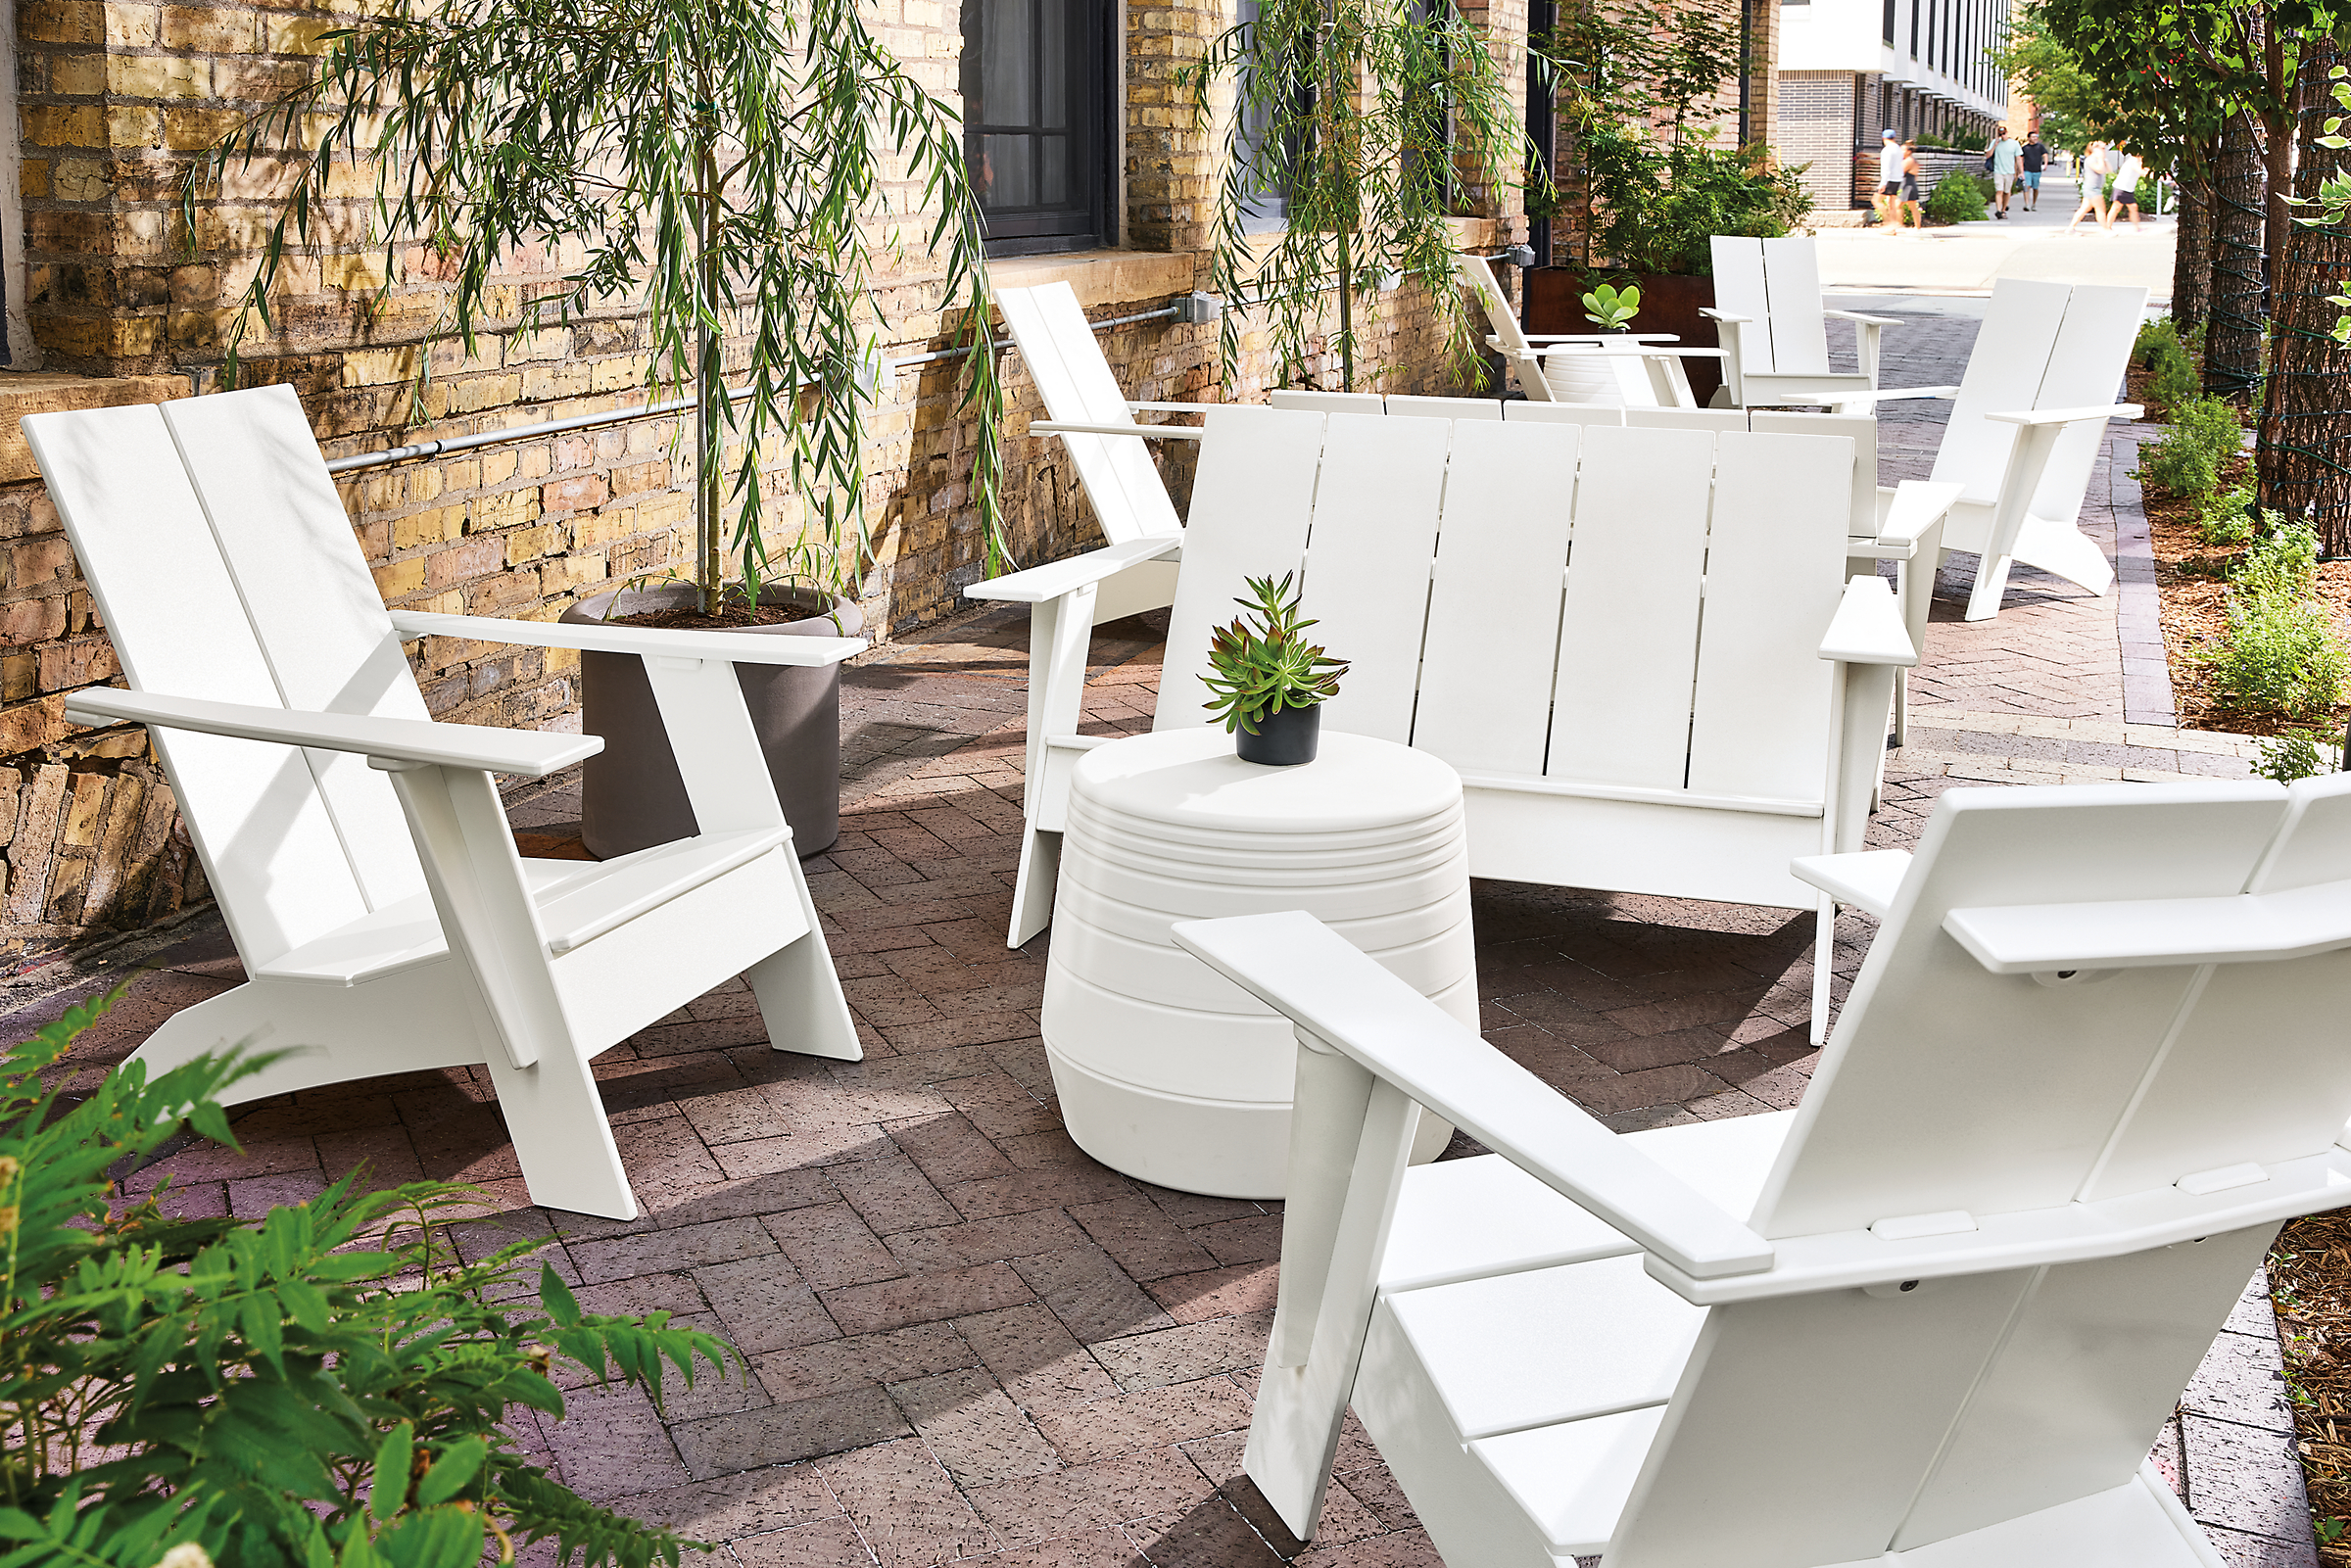 outdoor brick walkway with several white emmet sofas, chairs and a cusp stool.